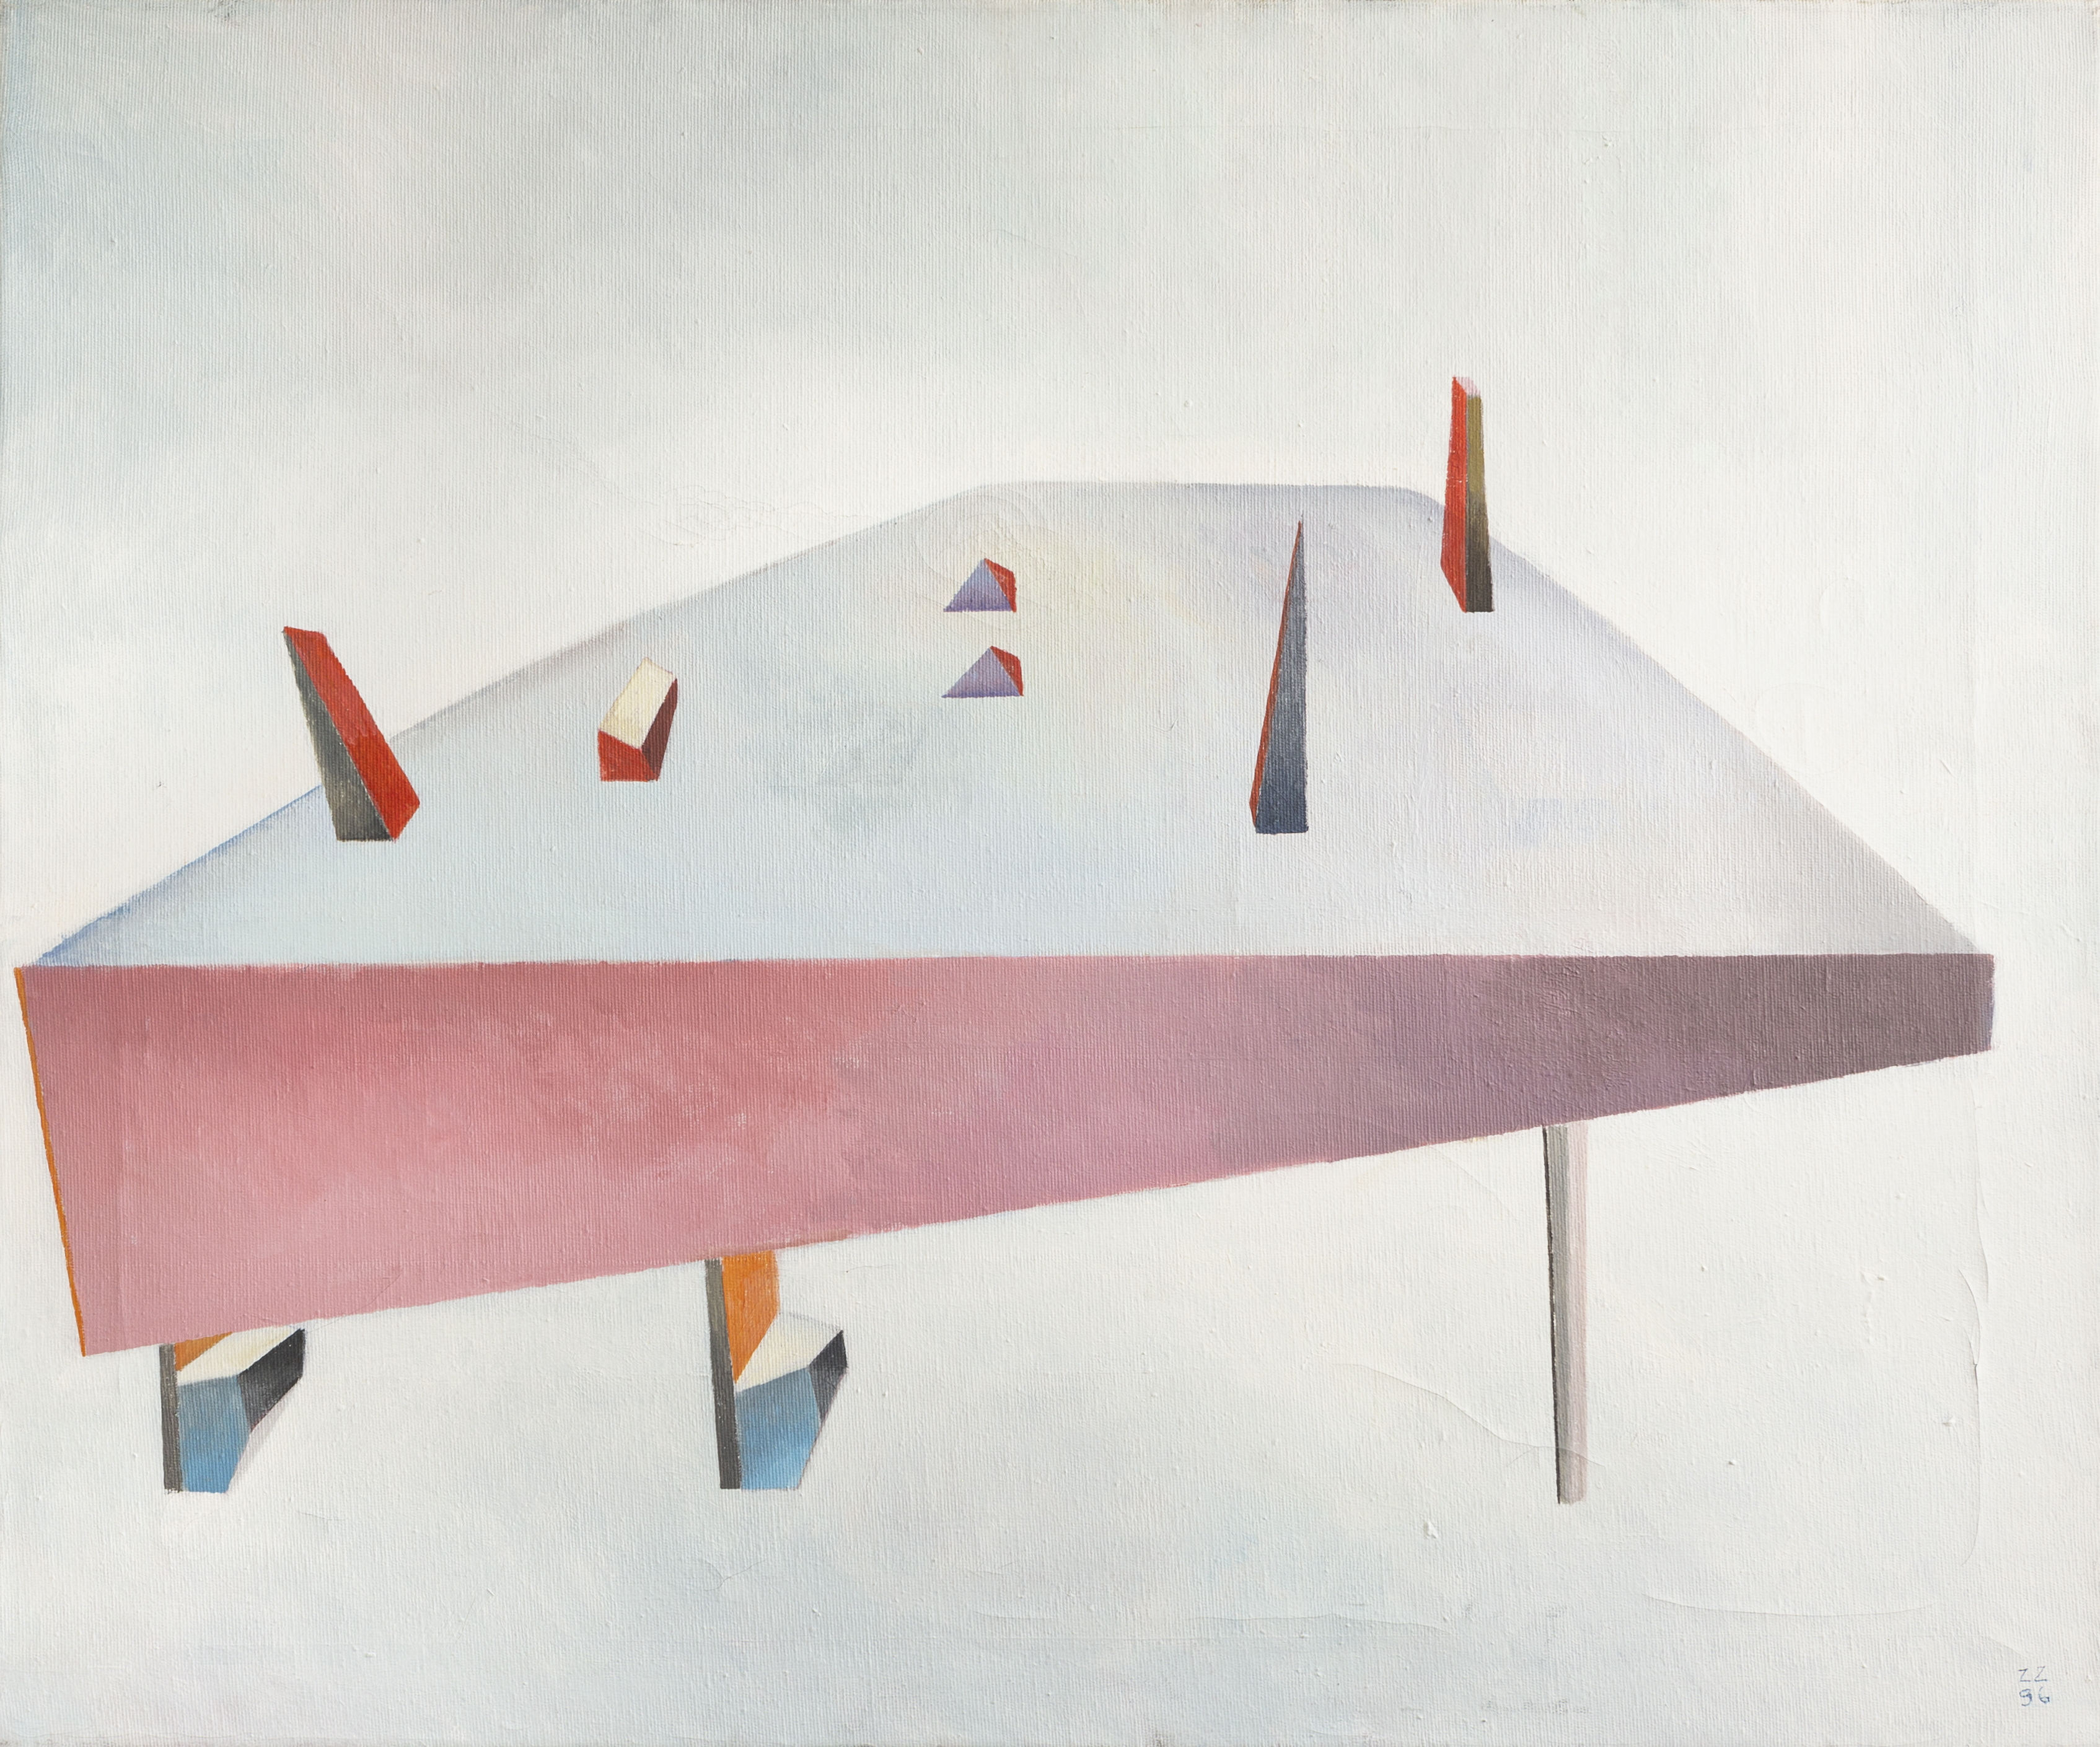 an abstract painting of various geometric forms in a slanted table